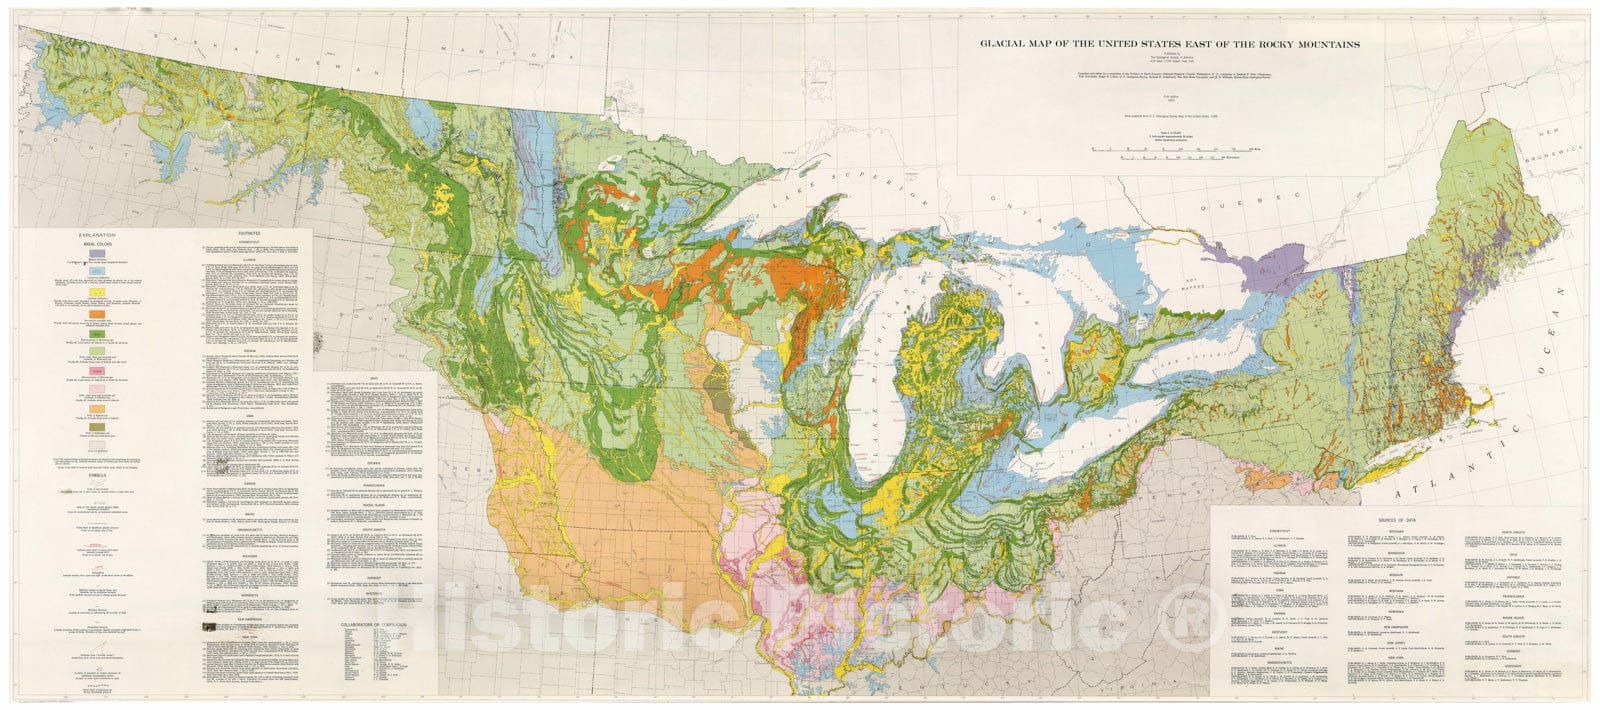 Historic Map - Wall Map, United States: East of the Rocky Mountains - Glacial Deposits 1959 - Vintage Wall Art